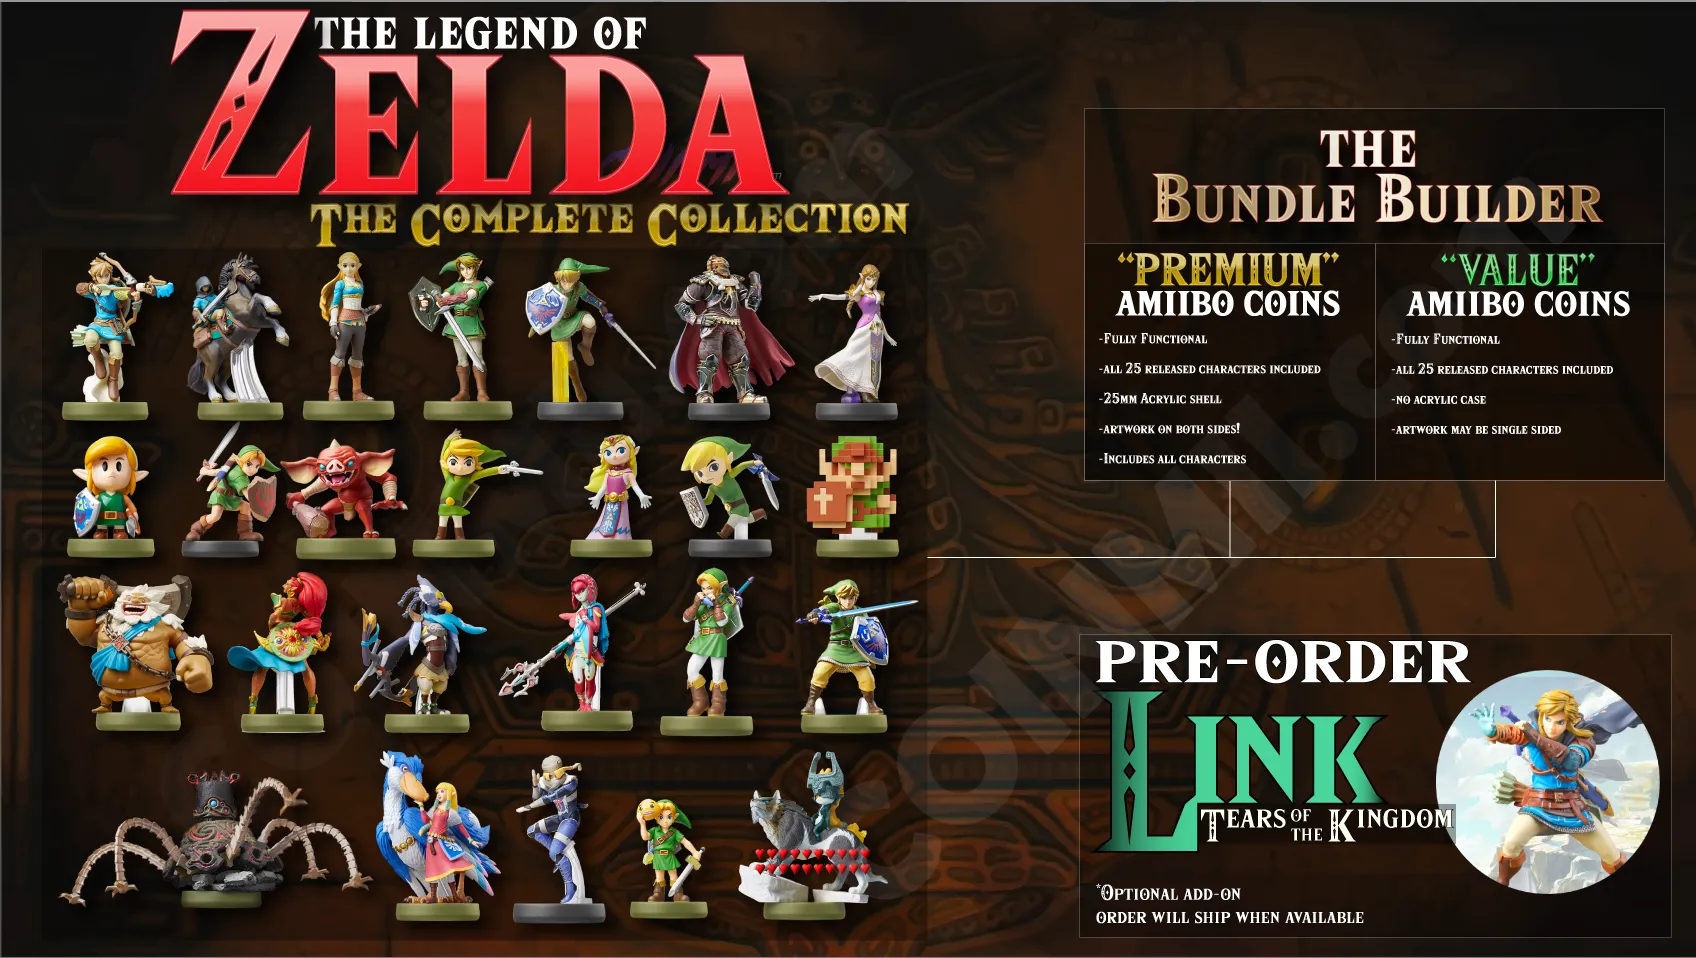 Limited Time Sale on Zelda Amiibo Coins!